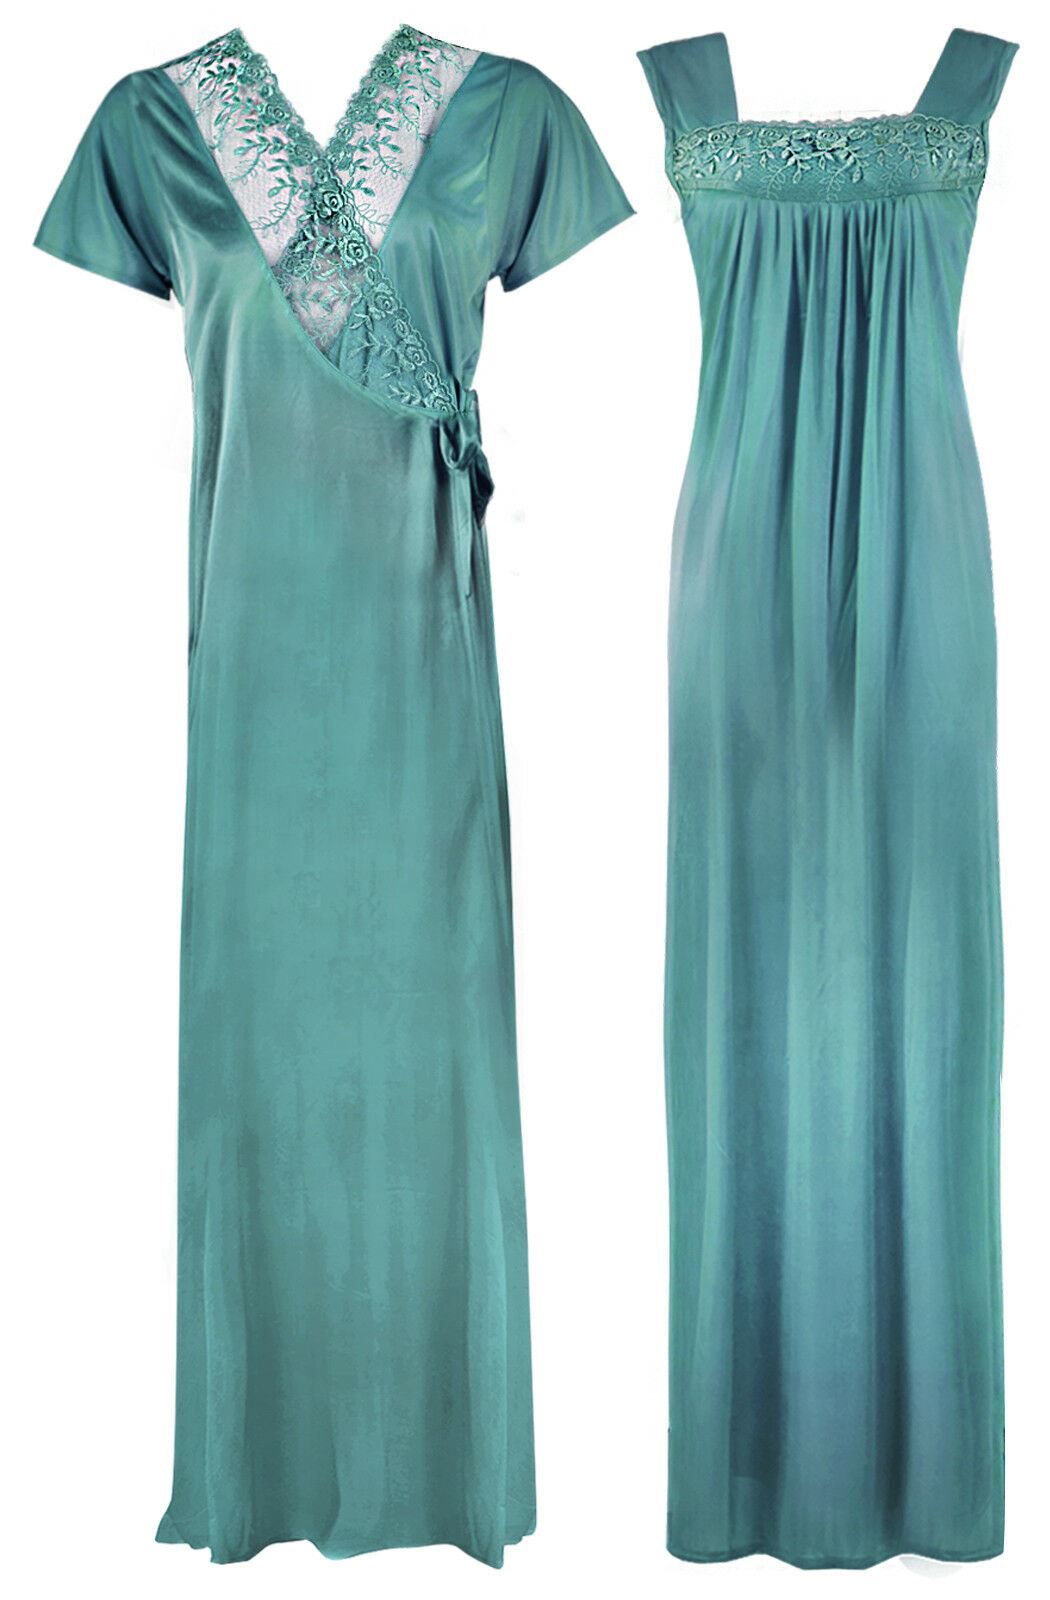 Teal / One Size WOMENS LONG SATIN CHEMISE NIGHTIE NIGHTDRESS LADIES DRESSING GOWN 2PC SET 8-16 The Orange Tags